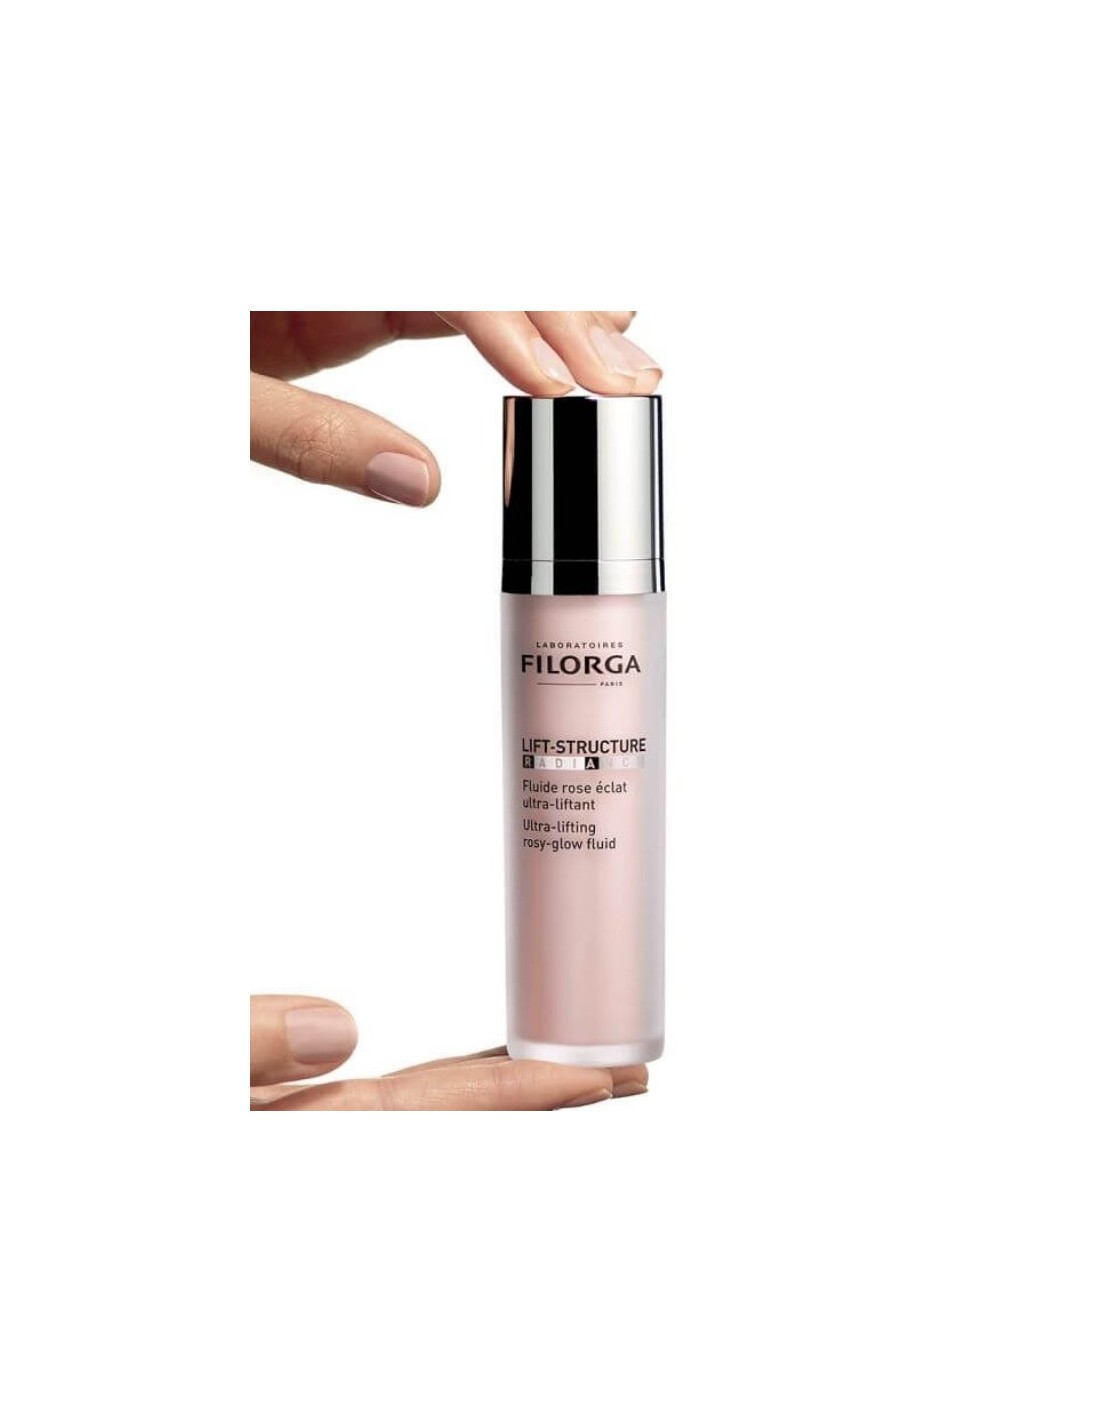 Filorga Lift-Structure Radiance - face fluid, 15 ml buy in AmoreShop